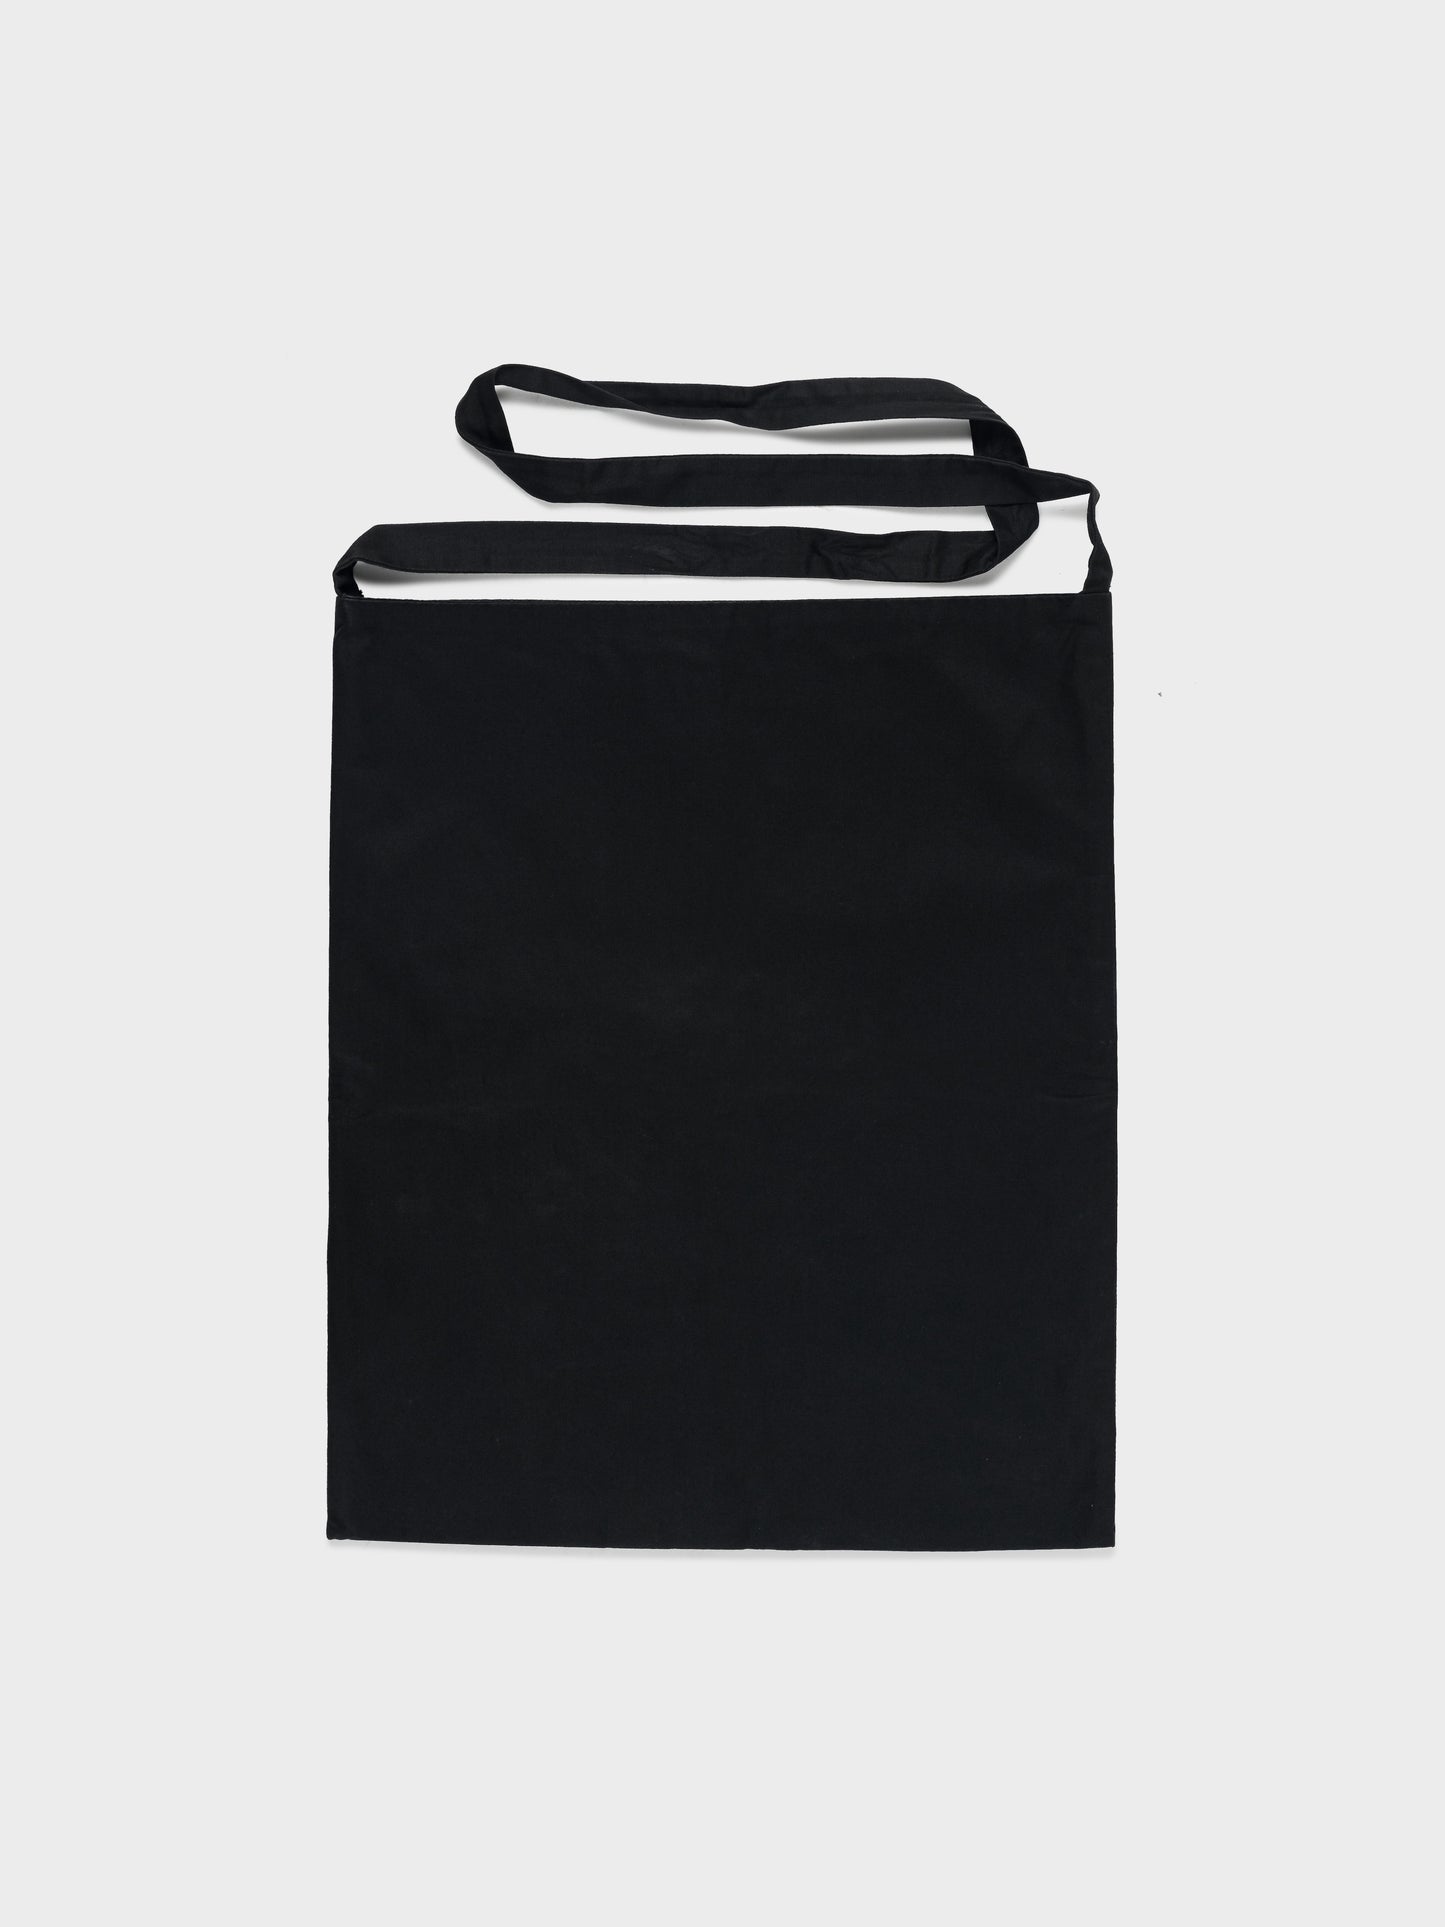 'Consumed' Commodity Tote Bag